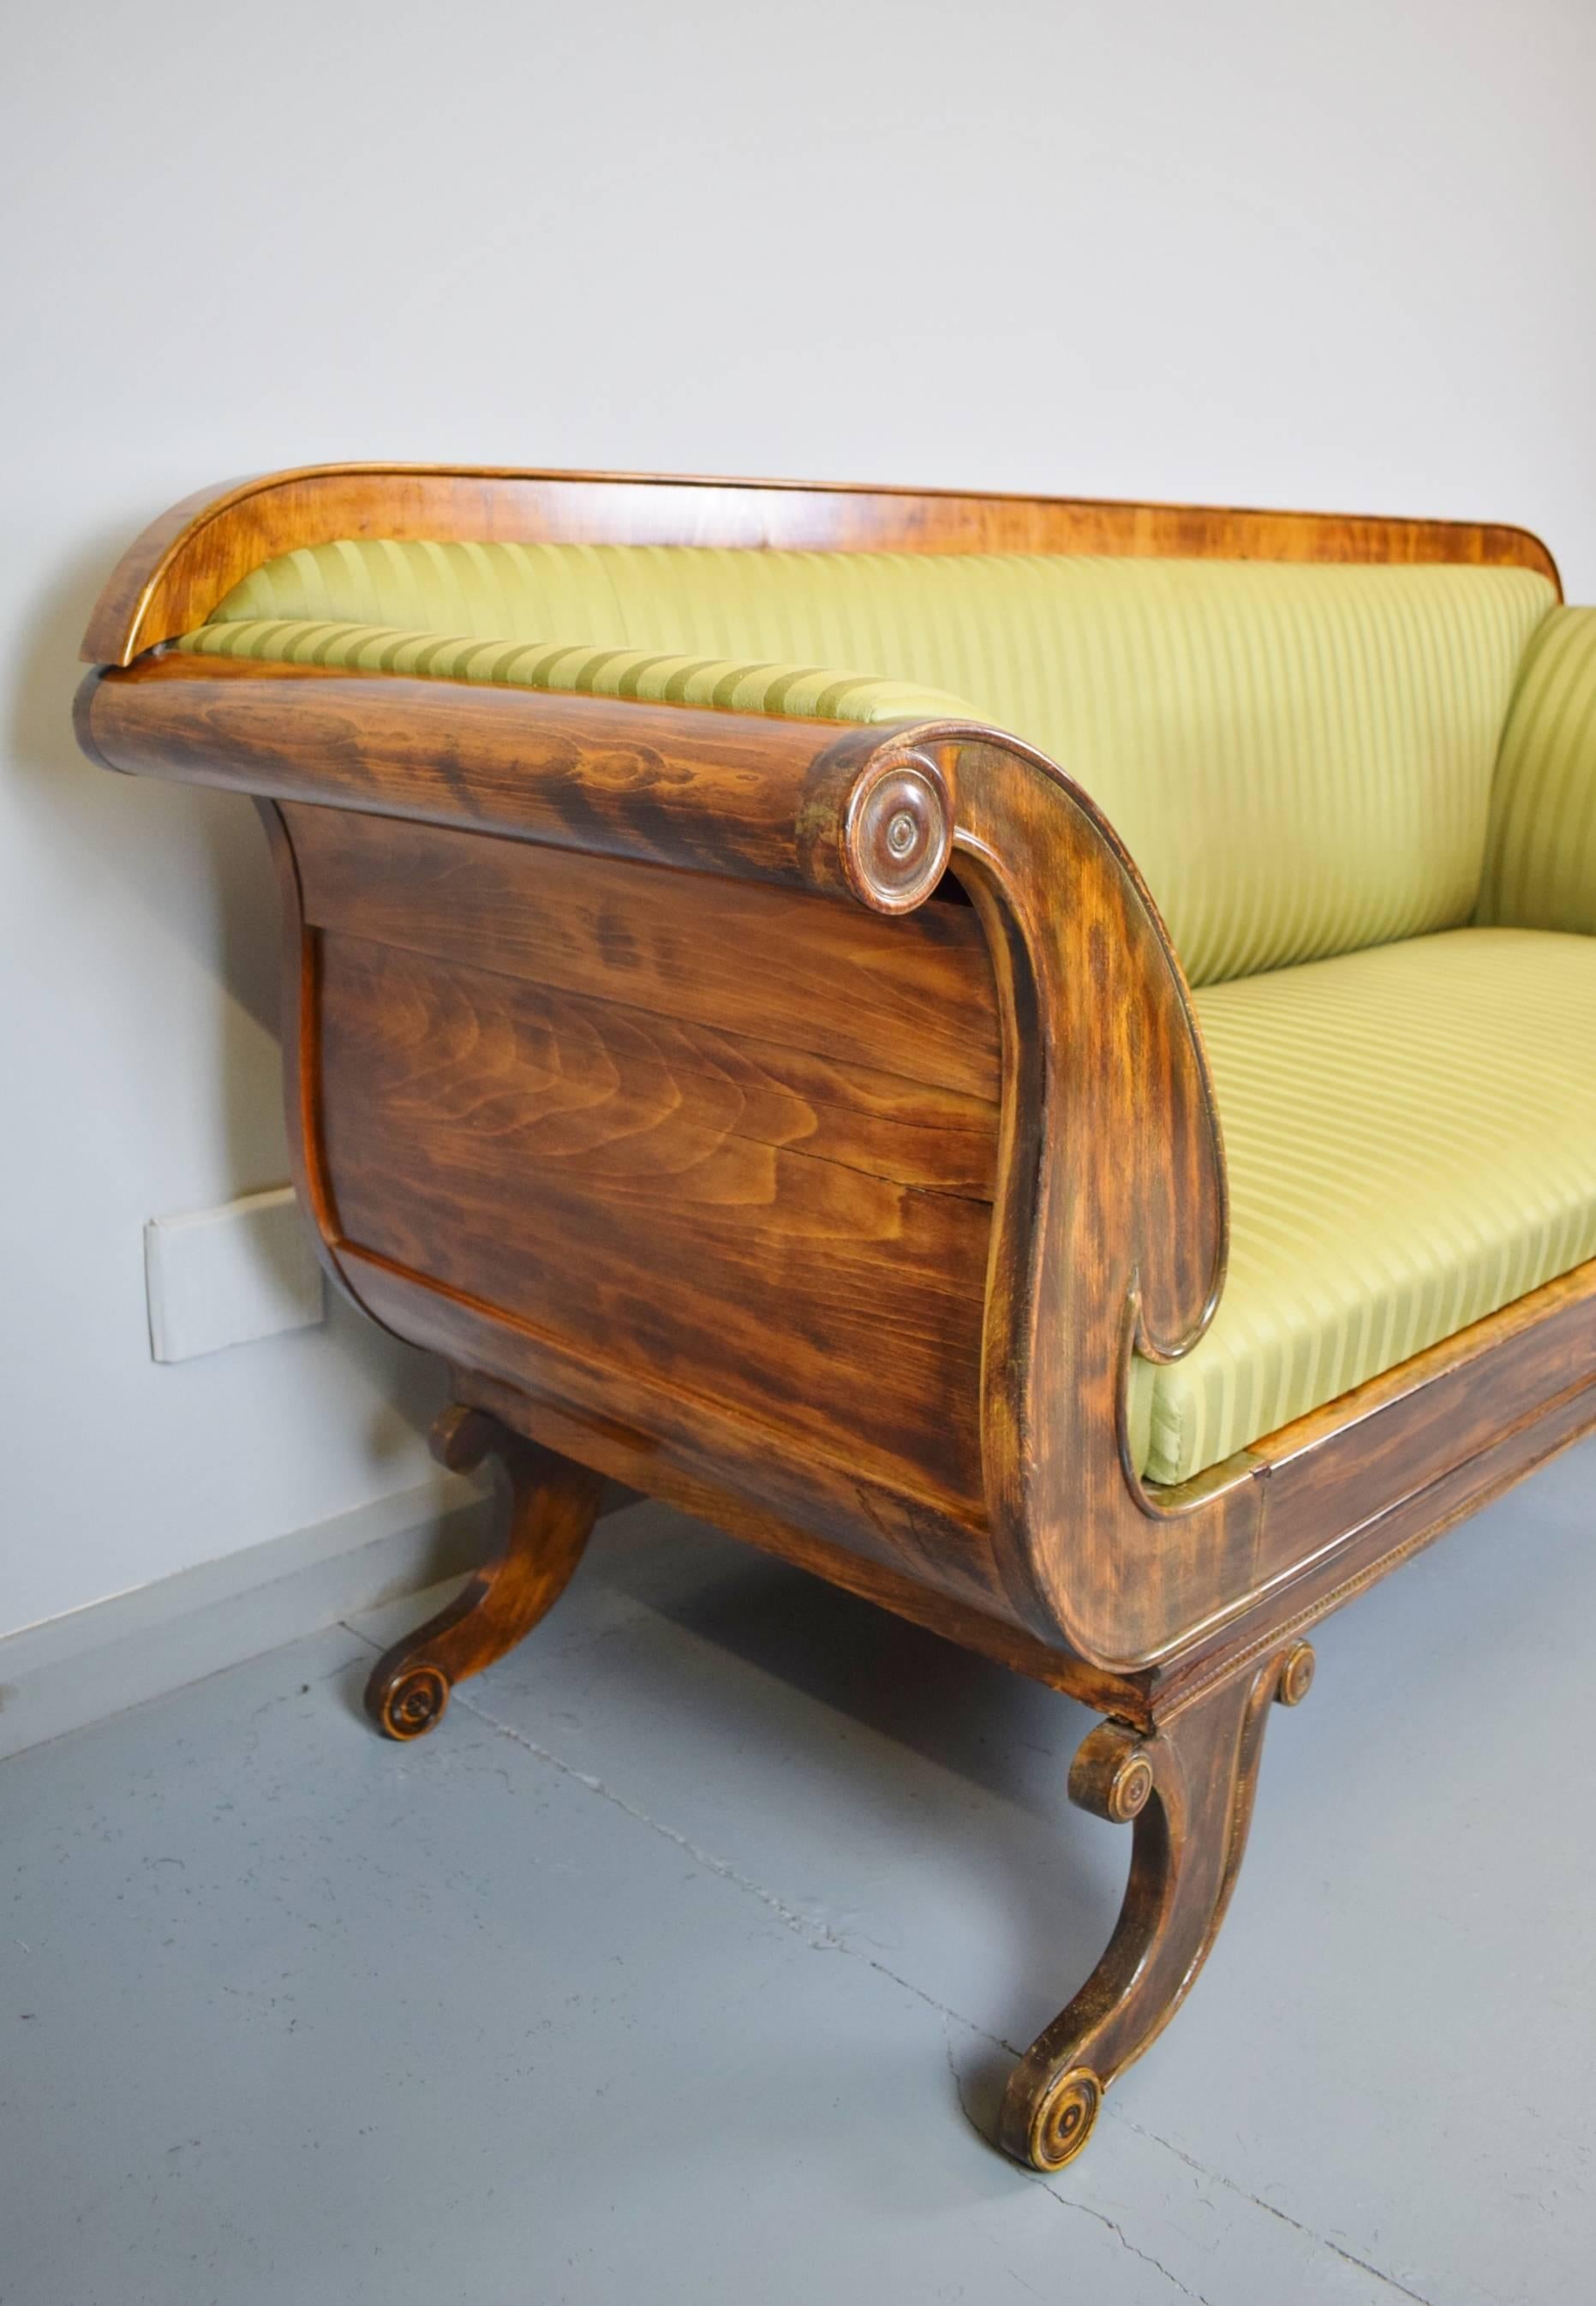 A stunning Victorian era scroll end sofa

We date this piece to be around the mid-19th century, circa 1850

The piece is constructed from mahogany and beechwood with beautiful patinated figuring to the wood

The upholstery is a green striped